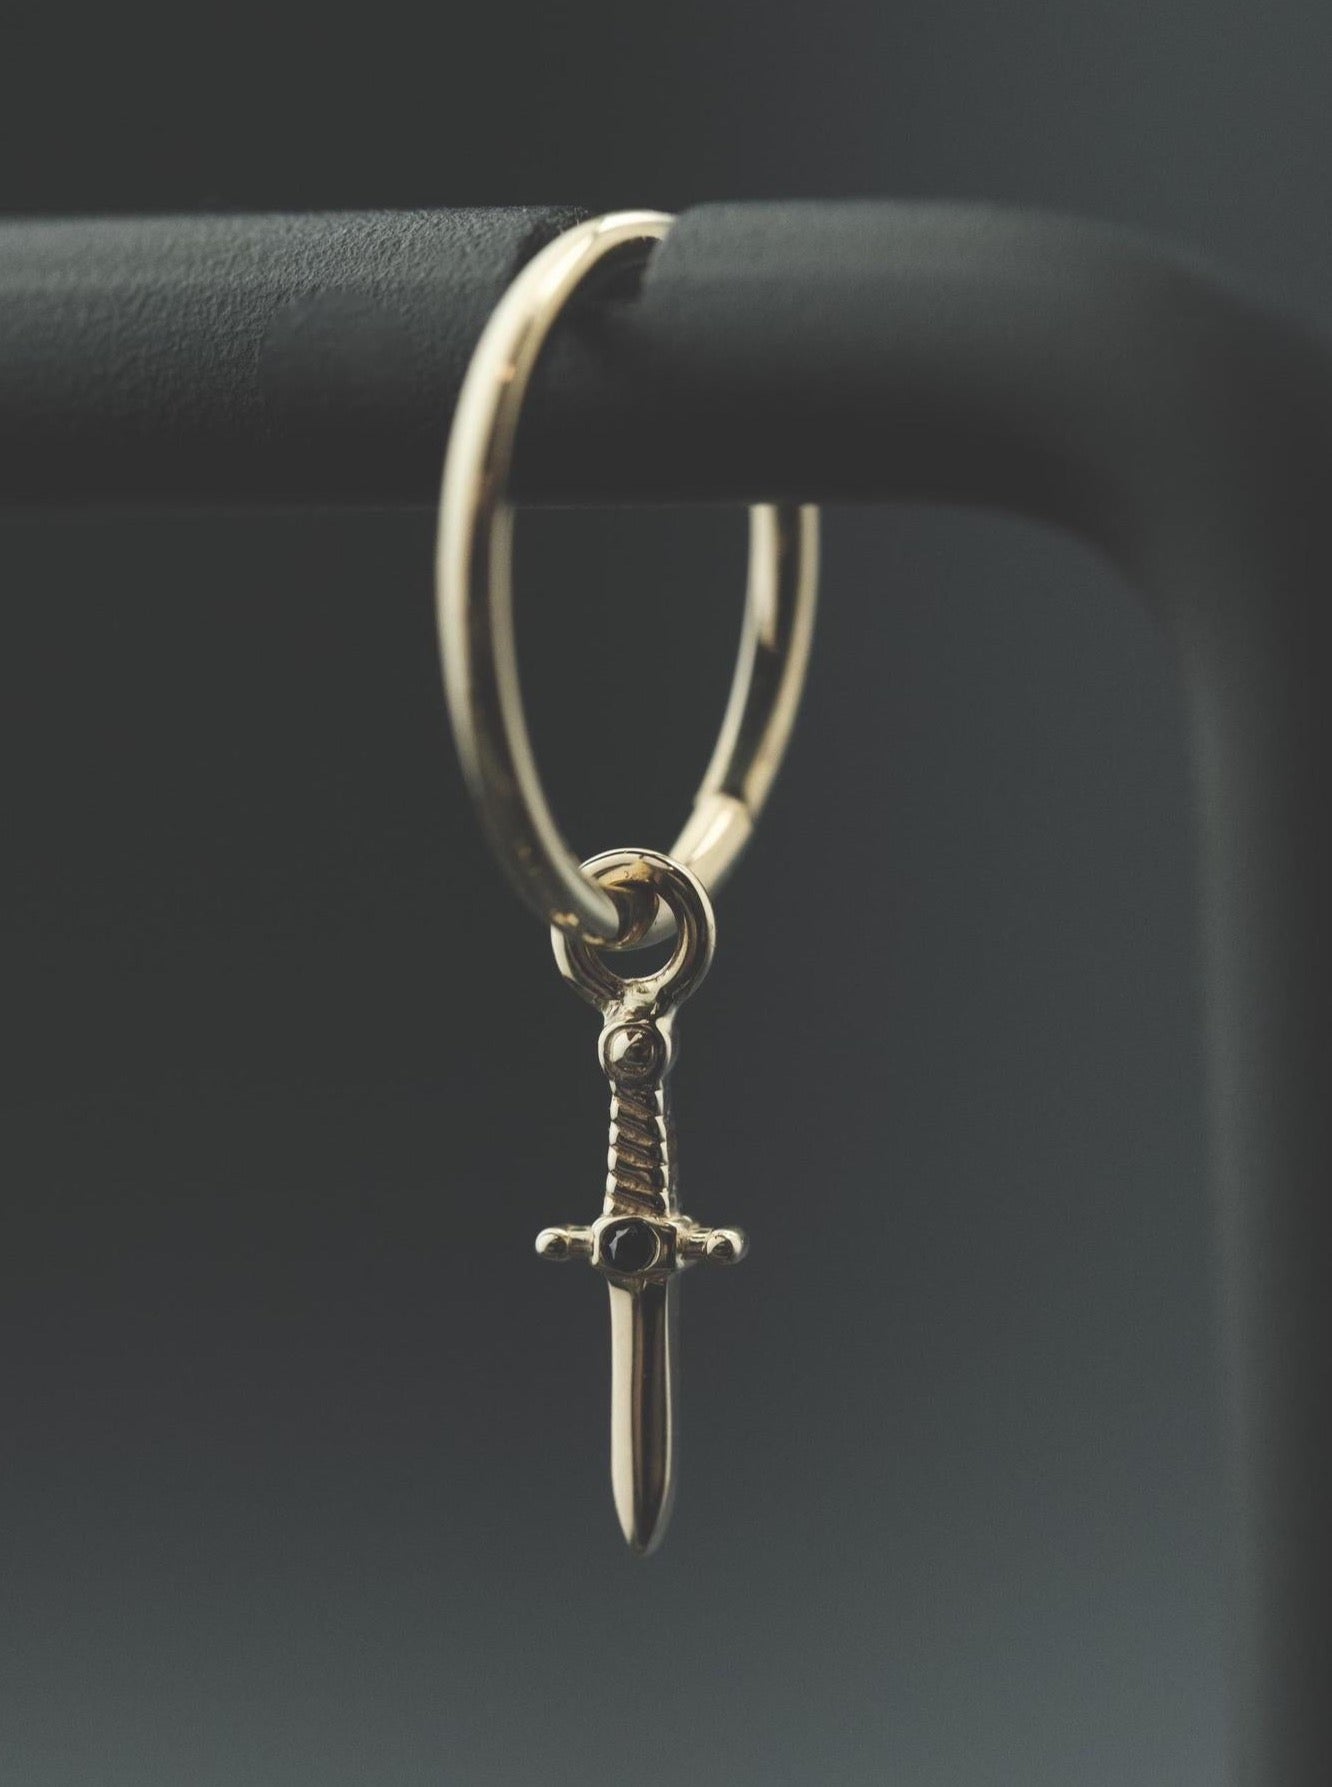 Slasher Dagger Charm (16g) with Black Diamond in 14k Yellow Gold by BVLA